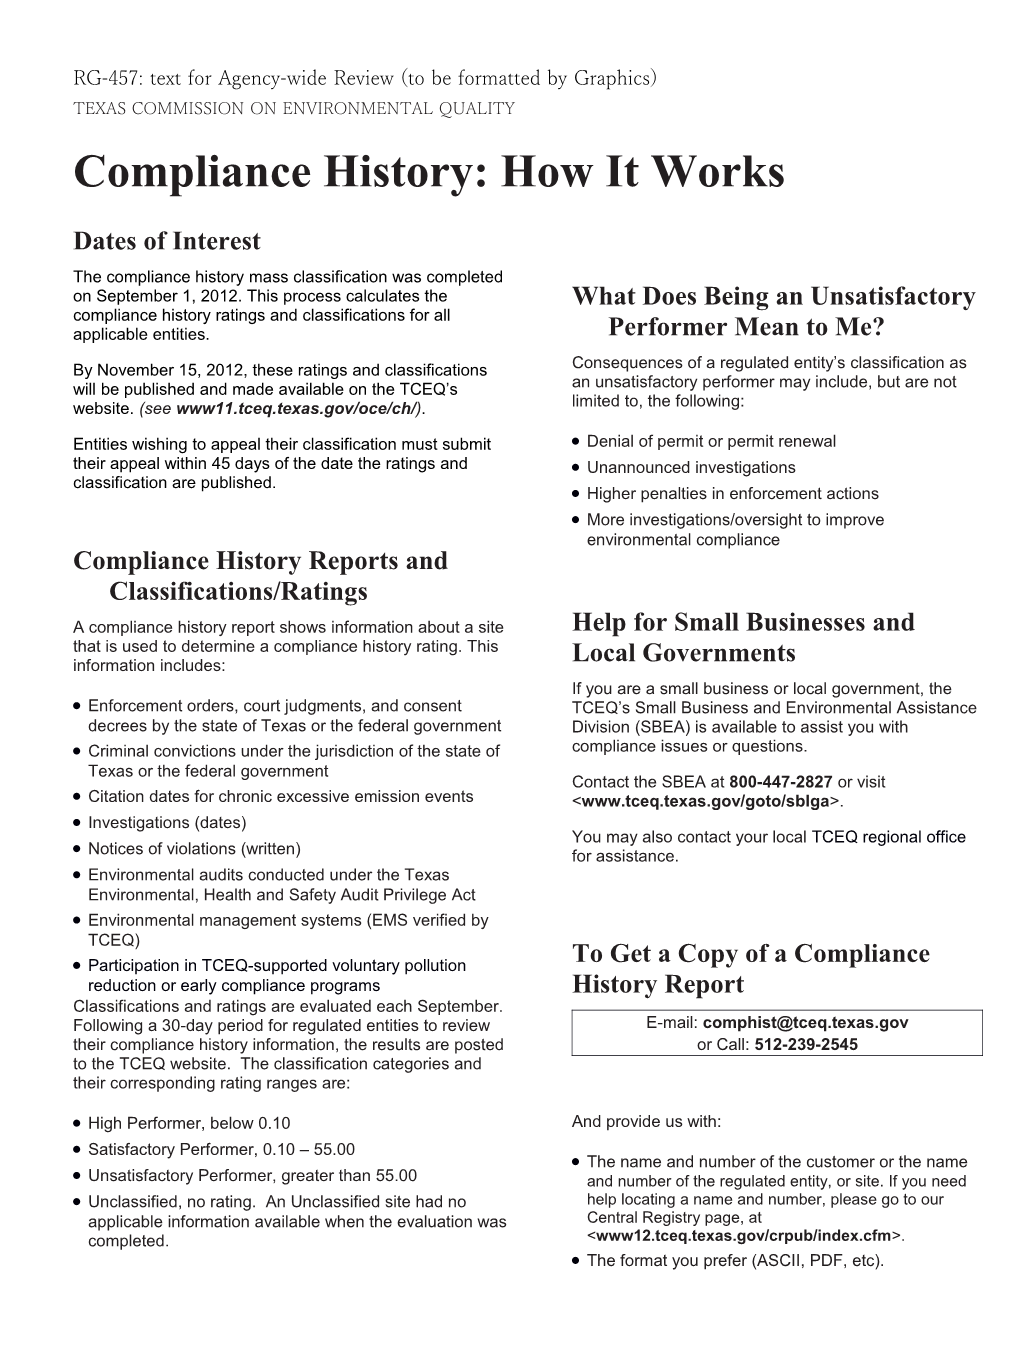 RG-457: Text for Agency-Wide Review (To Be Formatted by Graphics)